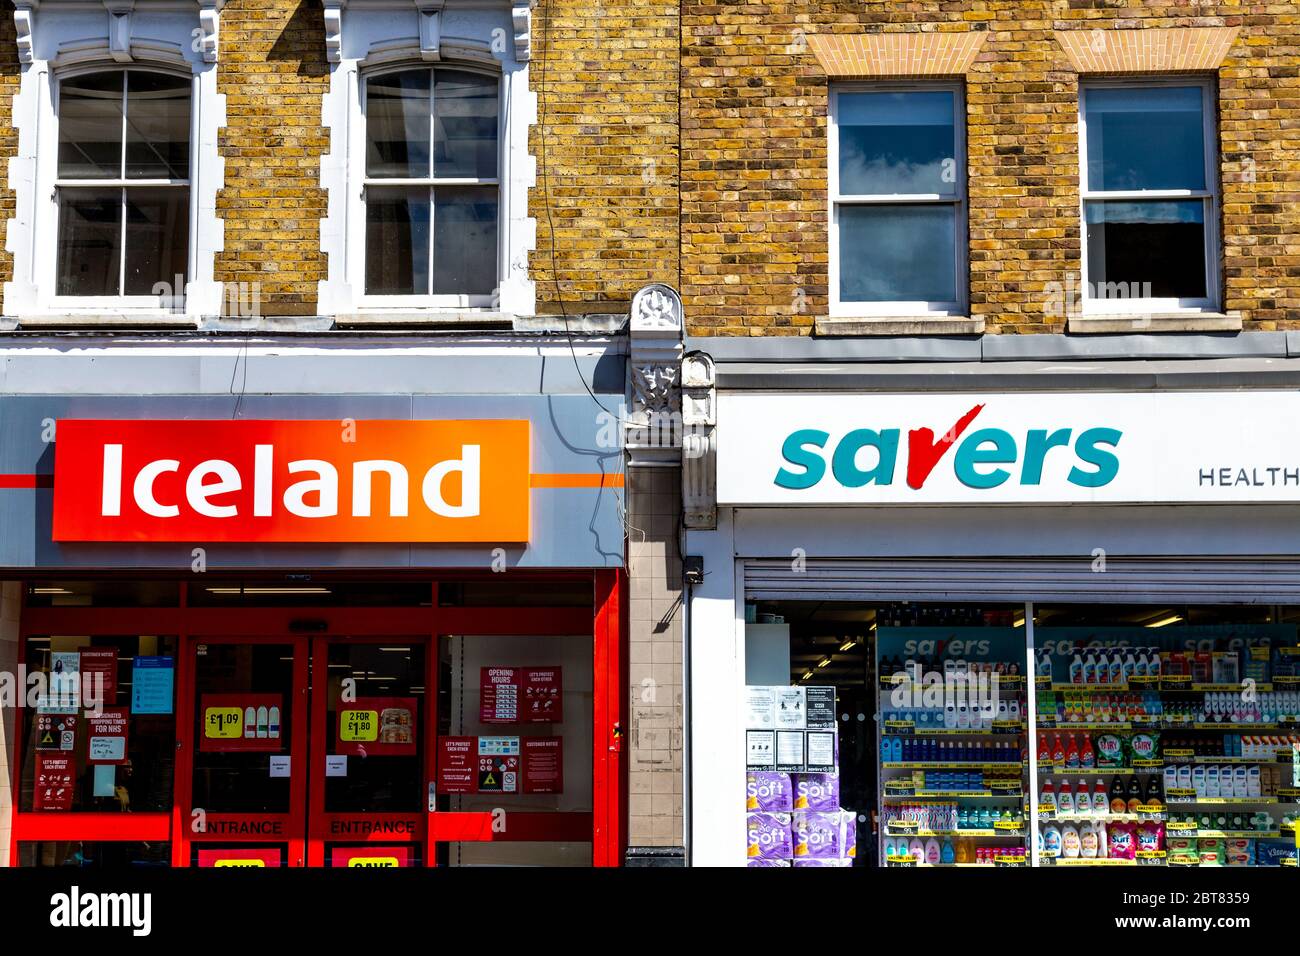 Signs for budget supermarket Iceland and discount health and beauty chain Savers, London, UK Stock Photo